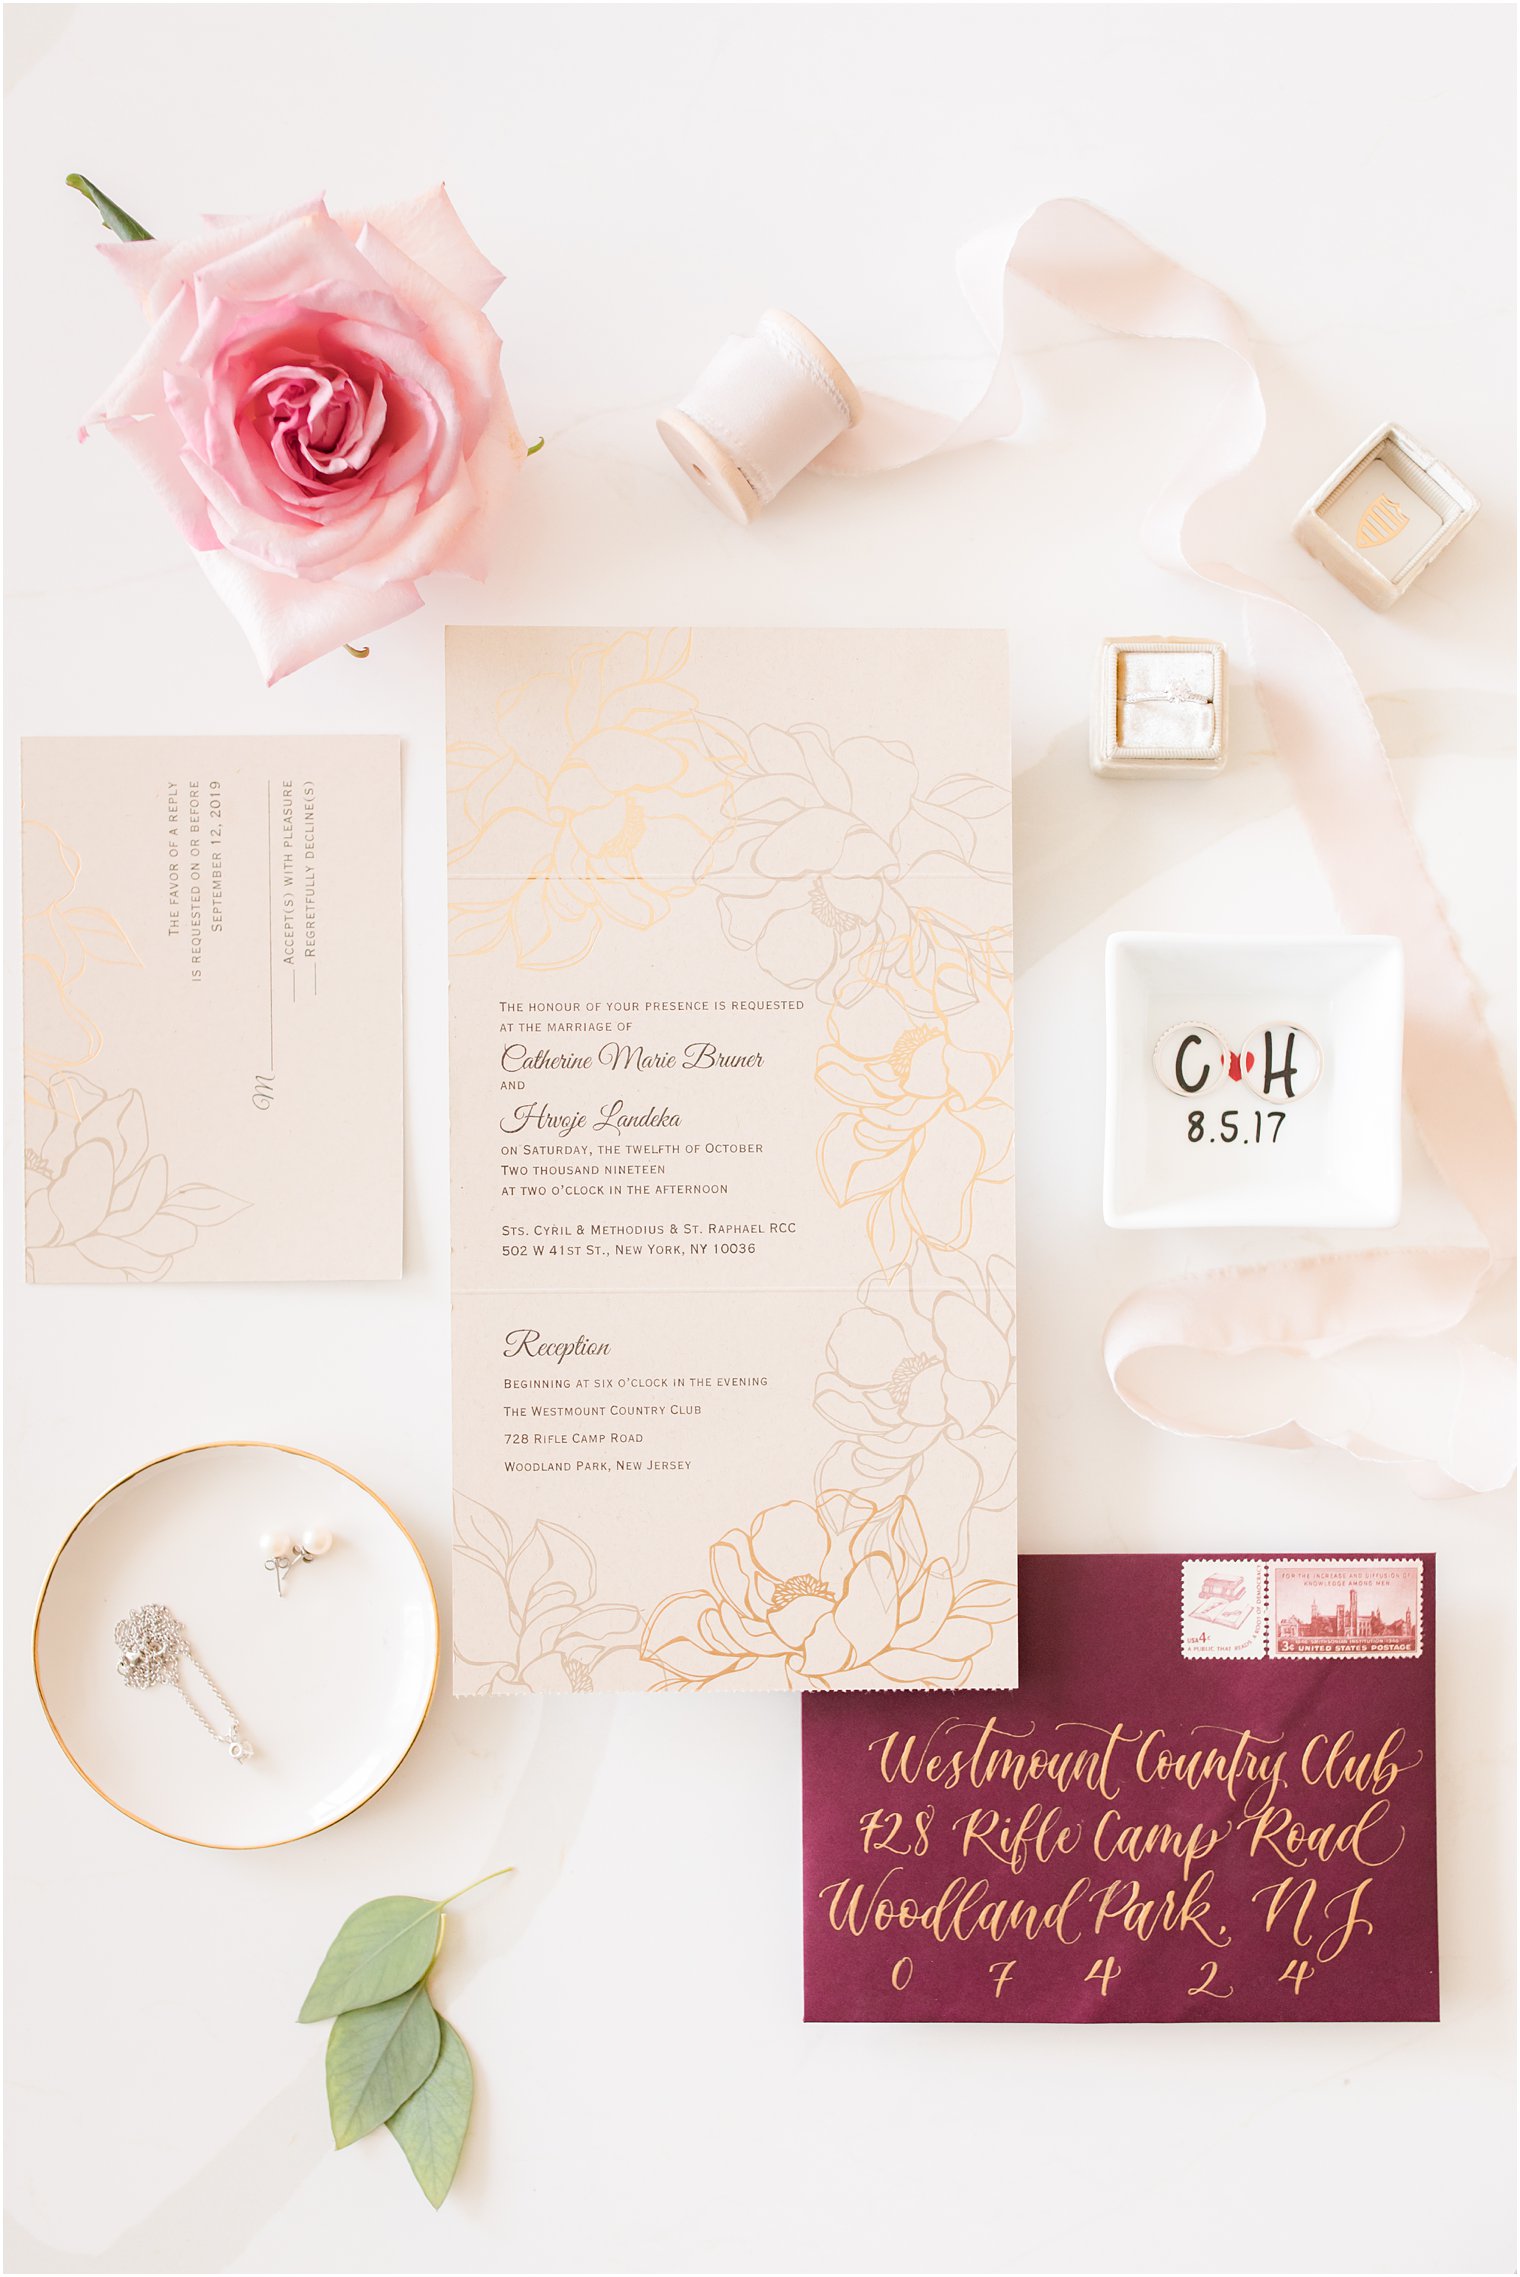 stationery by Inviting Treasures for Westmount Country Club Wedding photographed by Idalia Photography